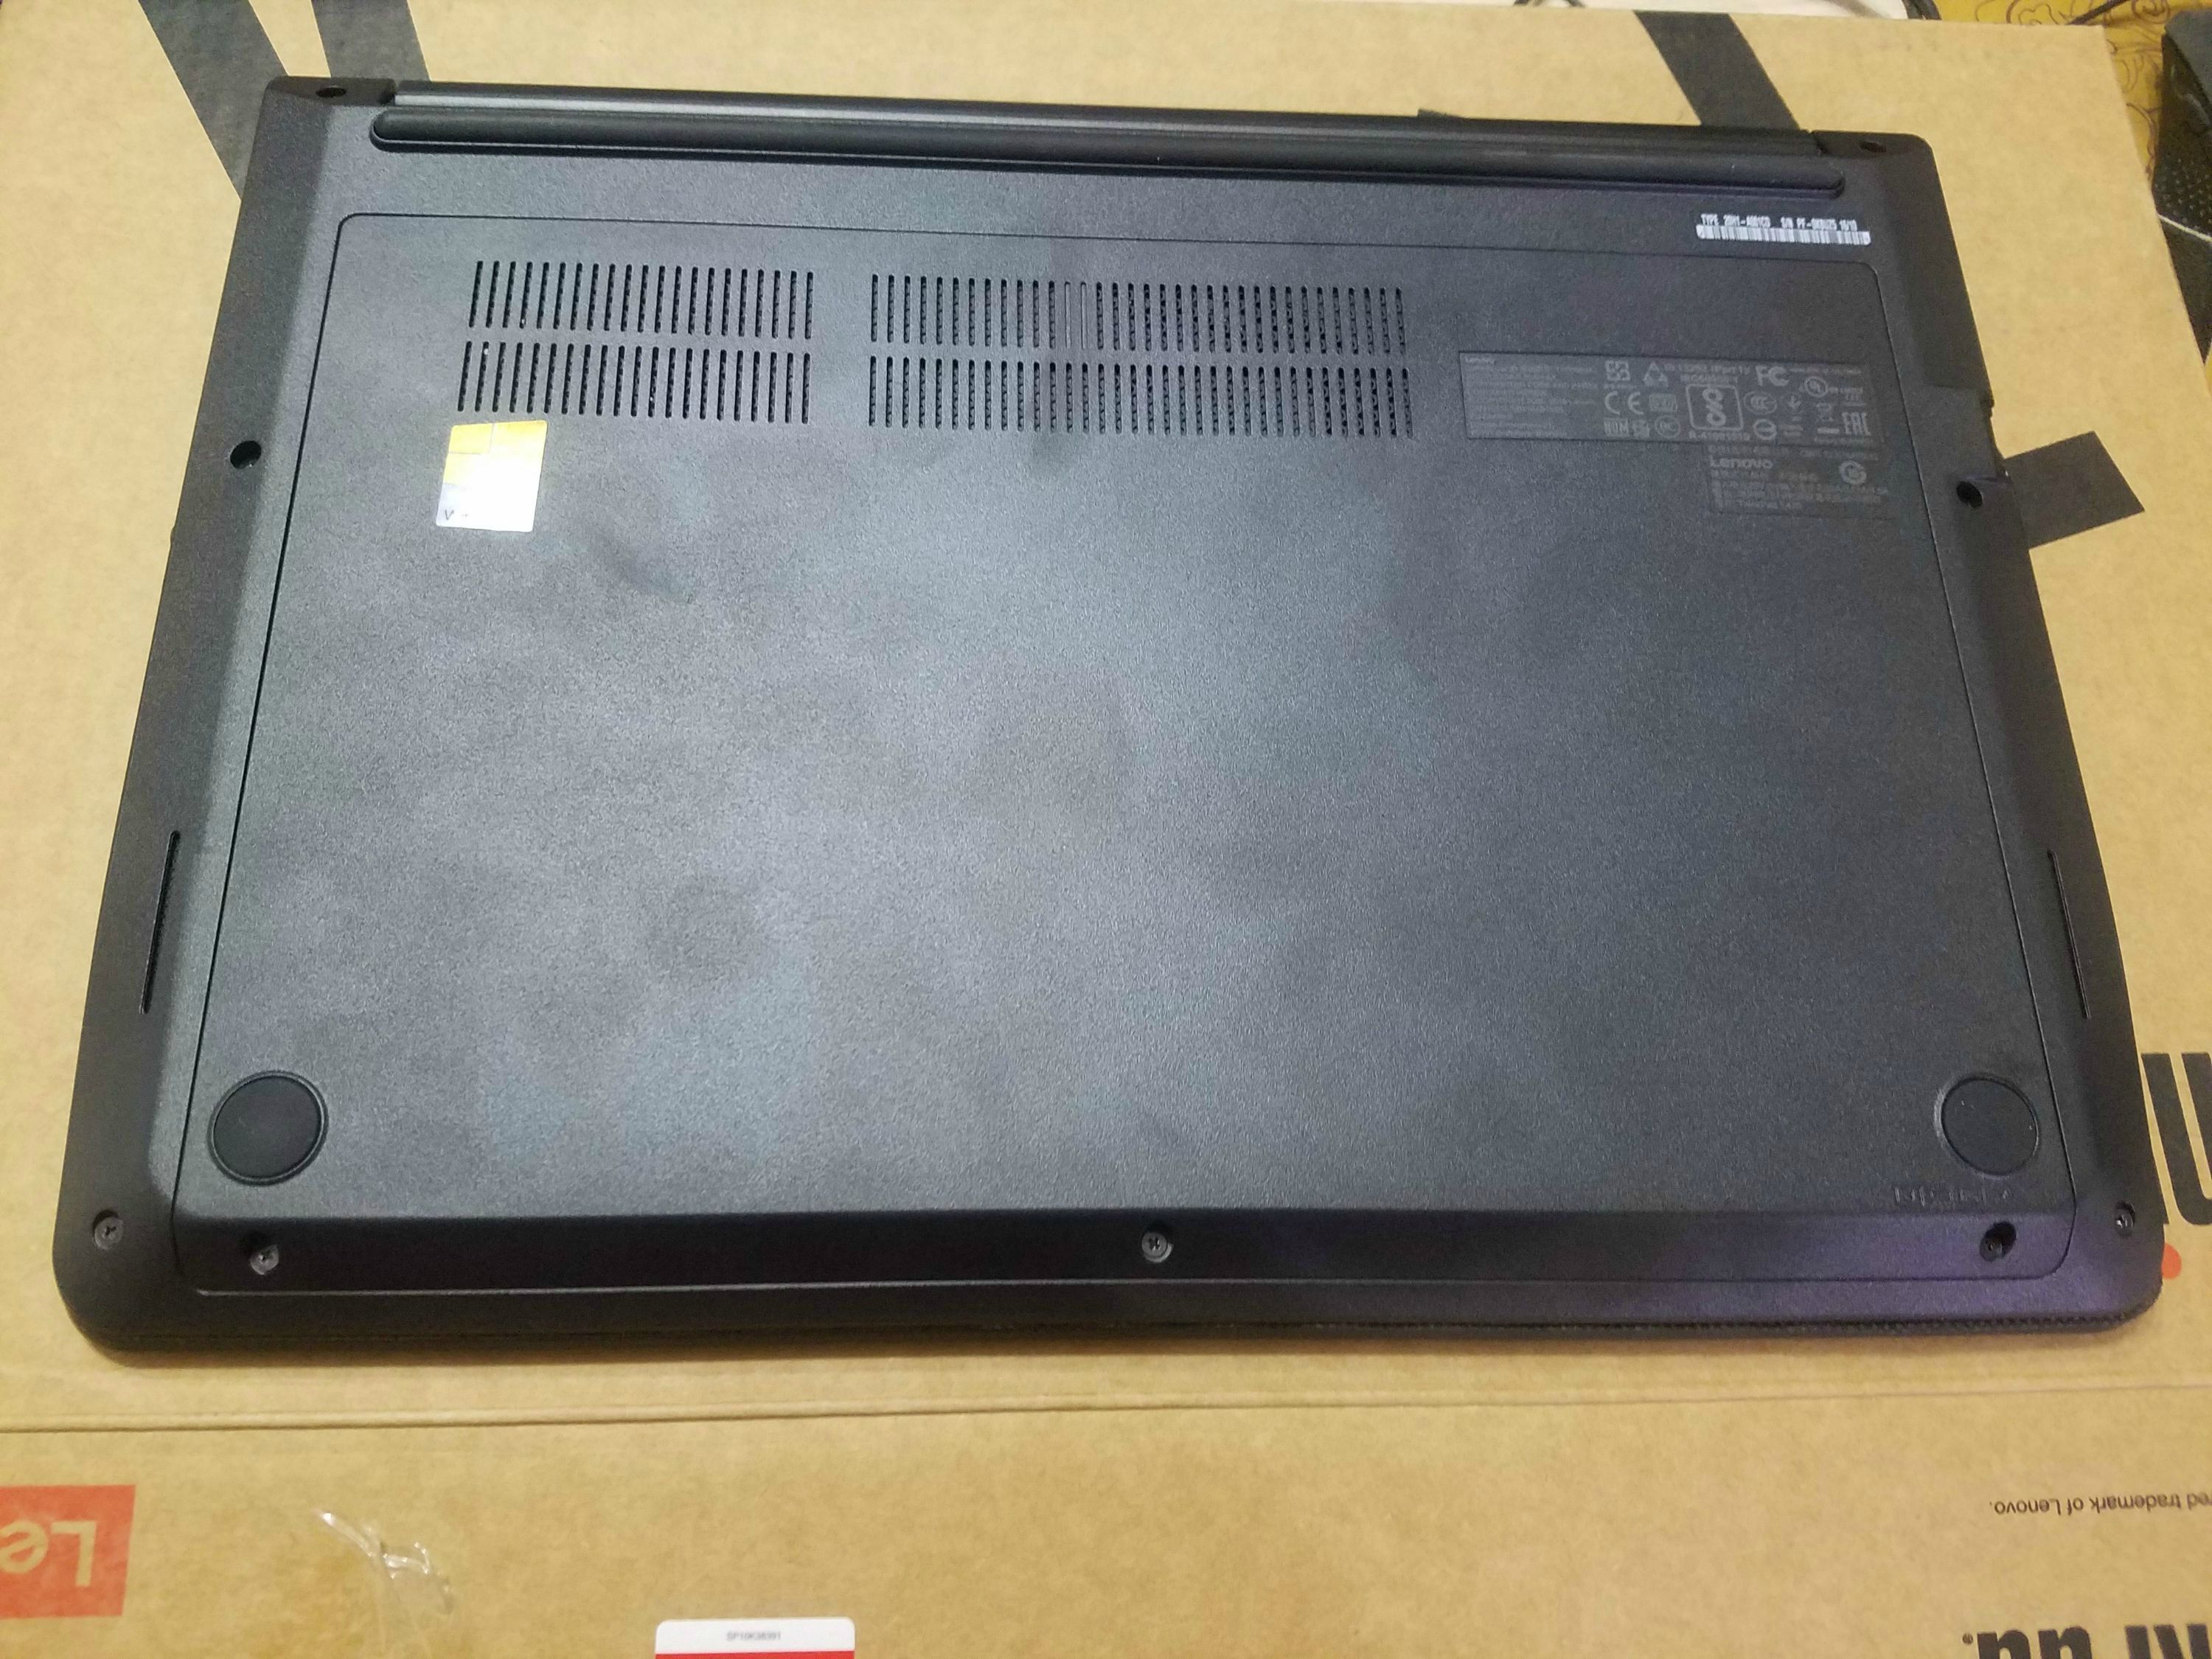 Thinkpad E470 Disassembly and SSD, HDD, RAM upgrade options